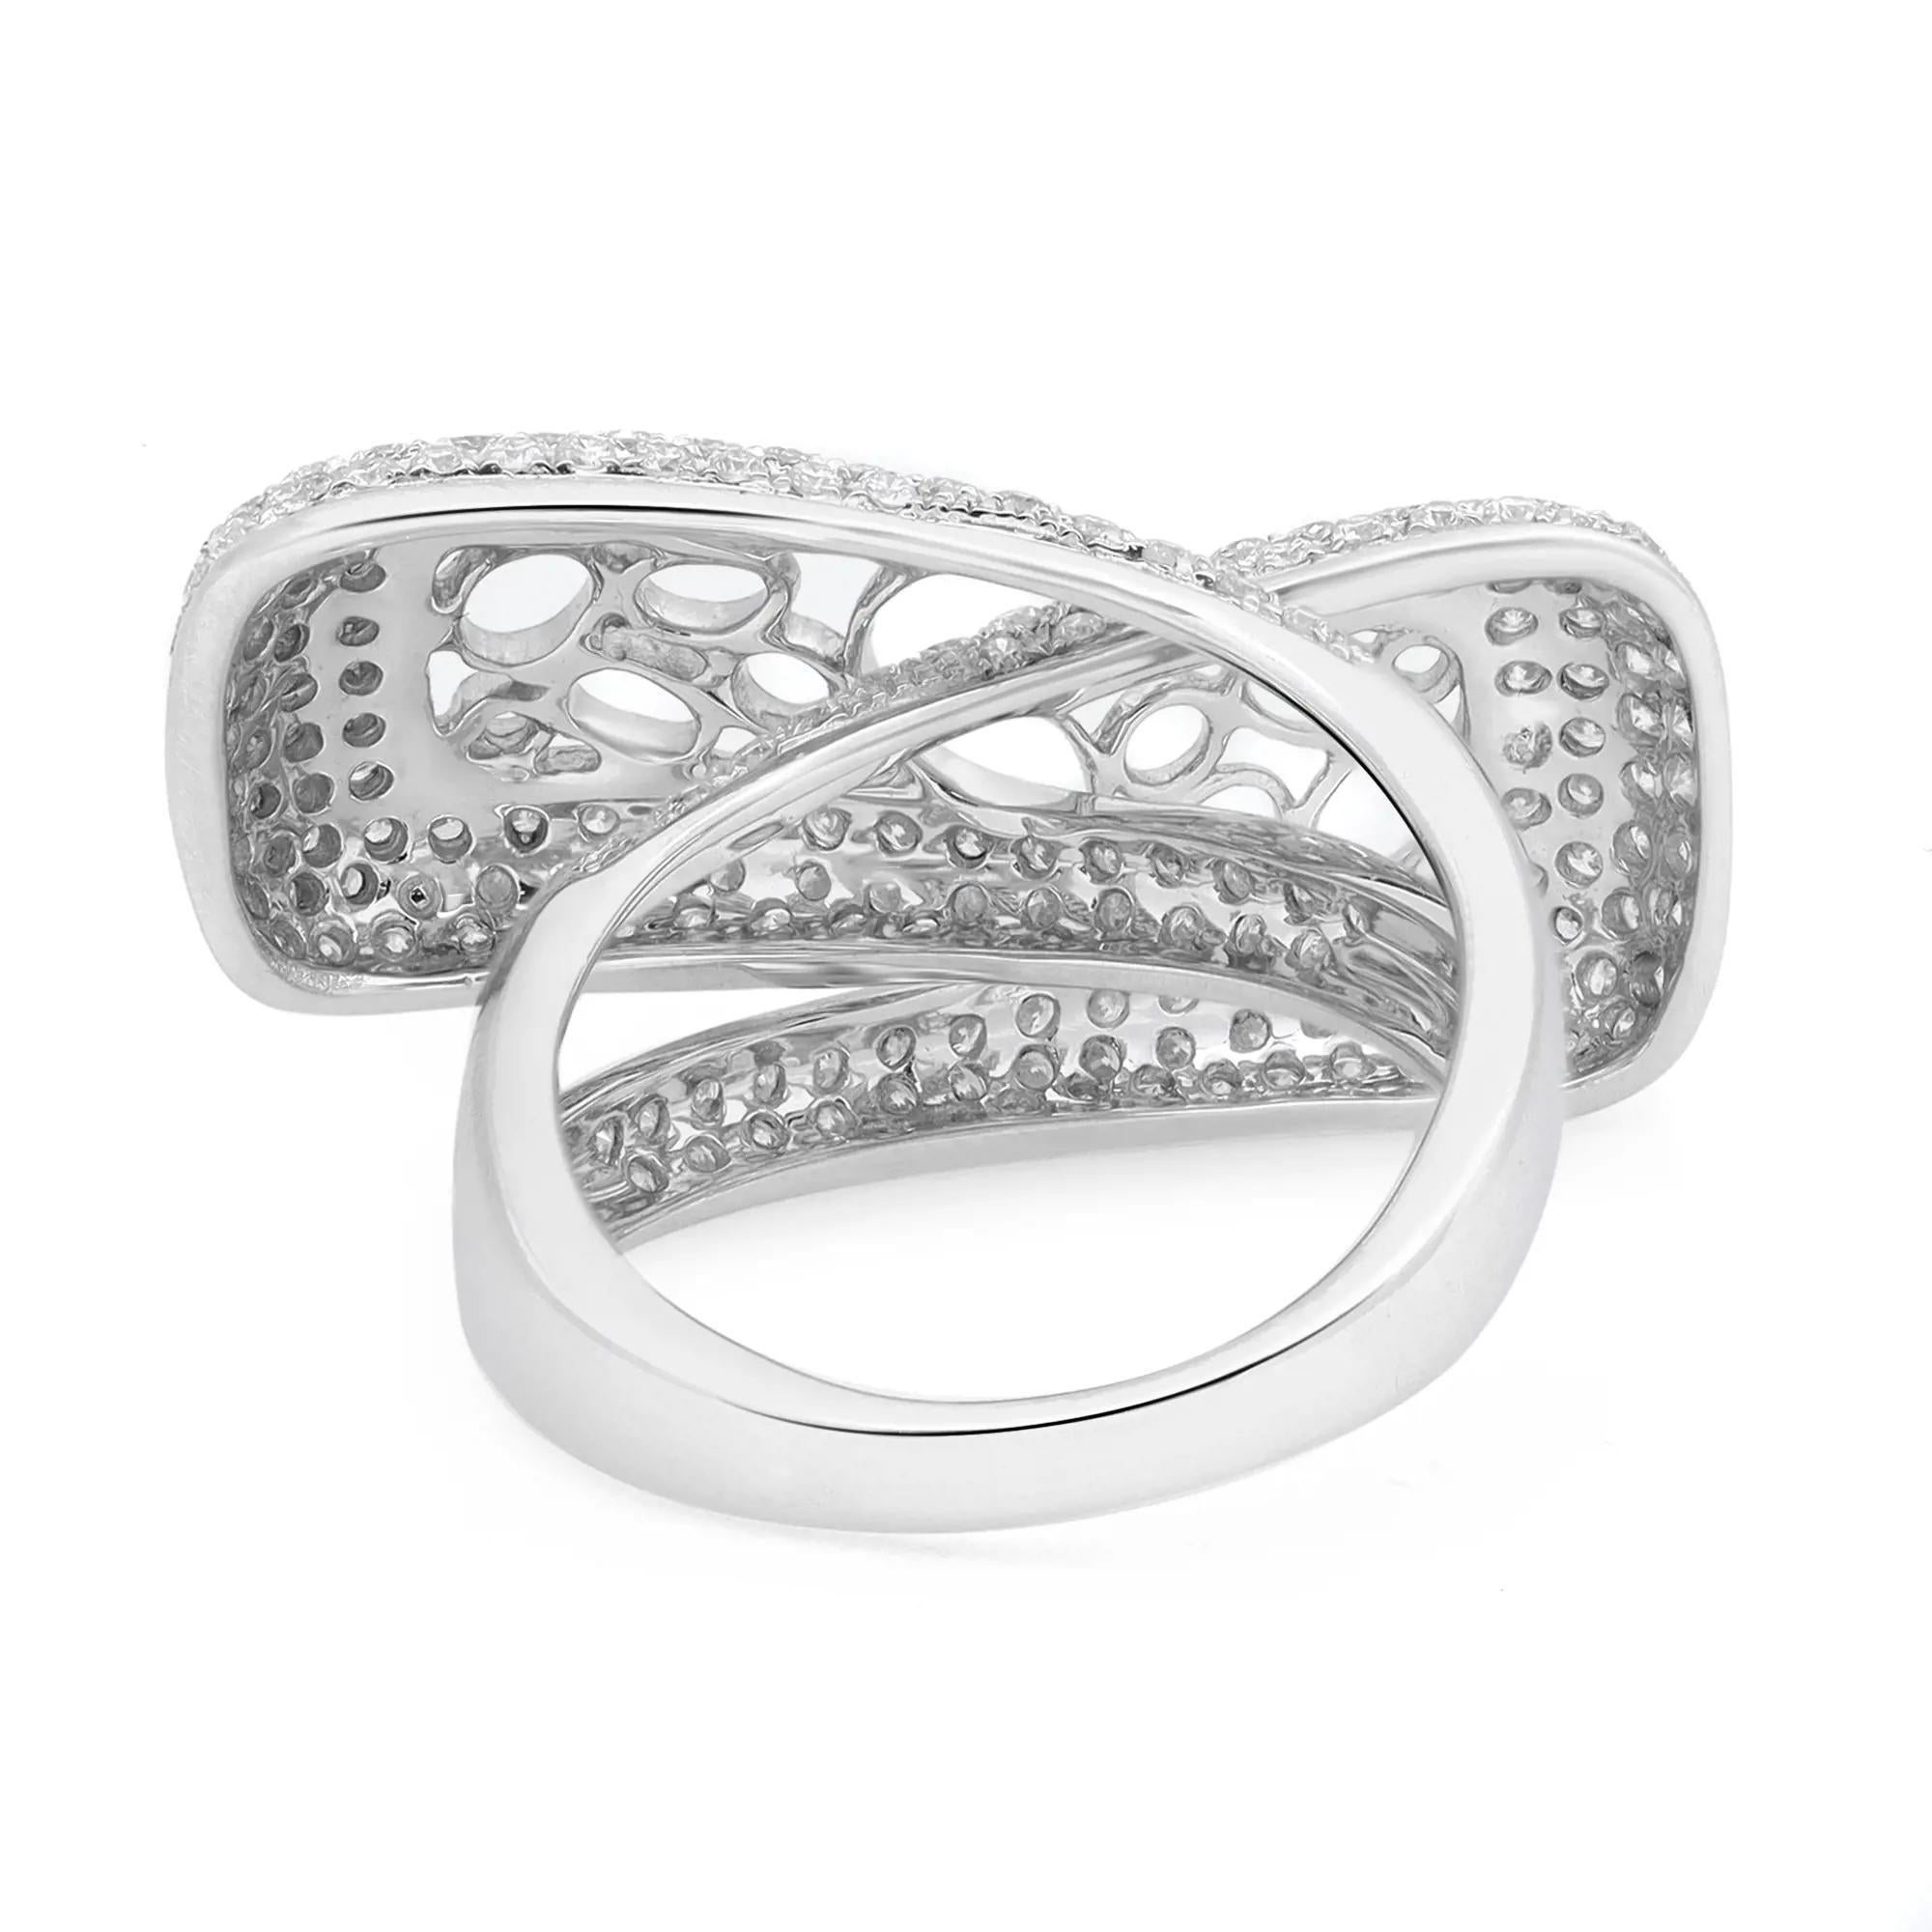 Modern 1.85cttw Pave Set Round Diamond Ladies Cocktail Ring 14k White Gold For Sale